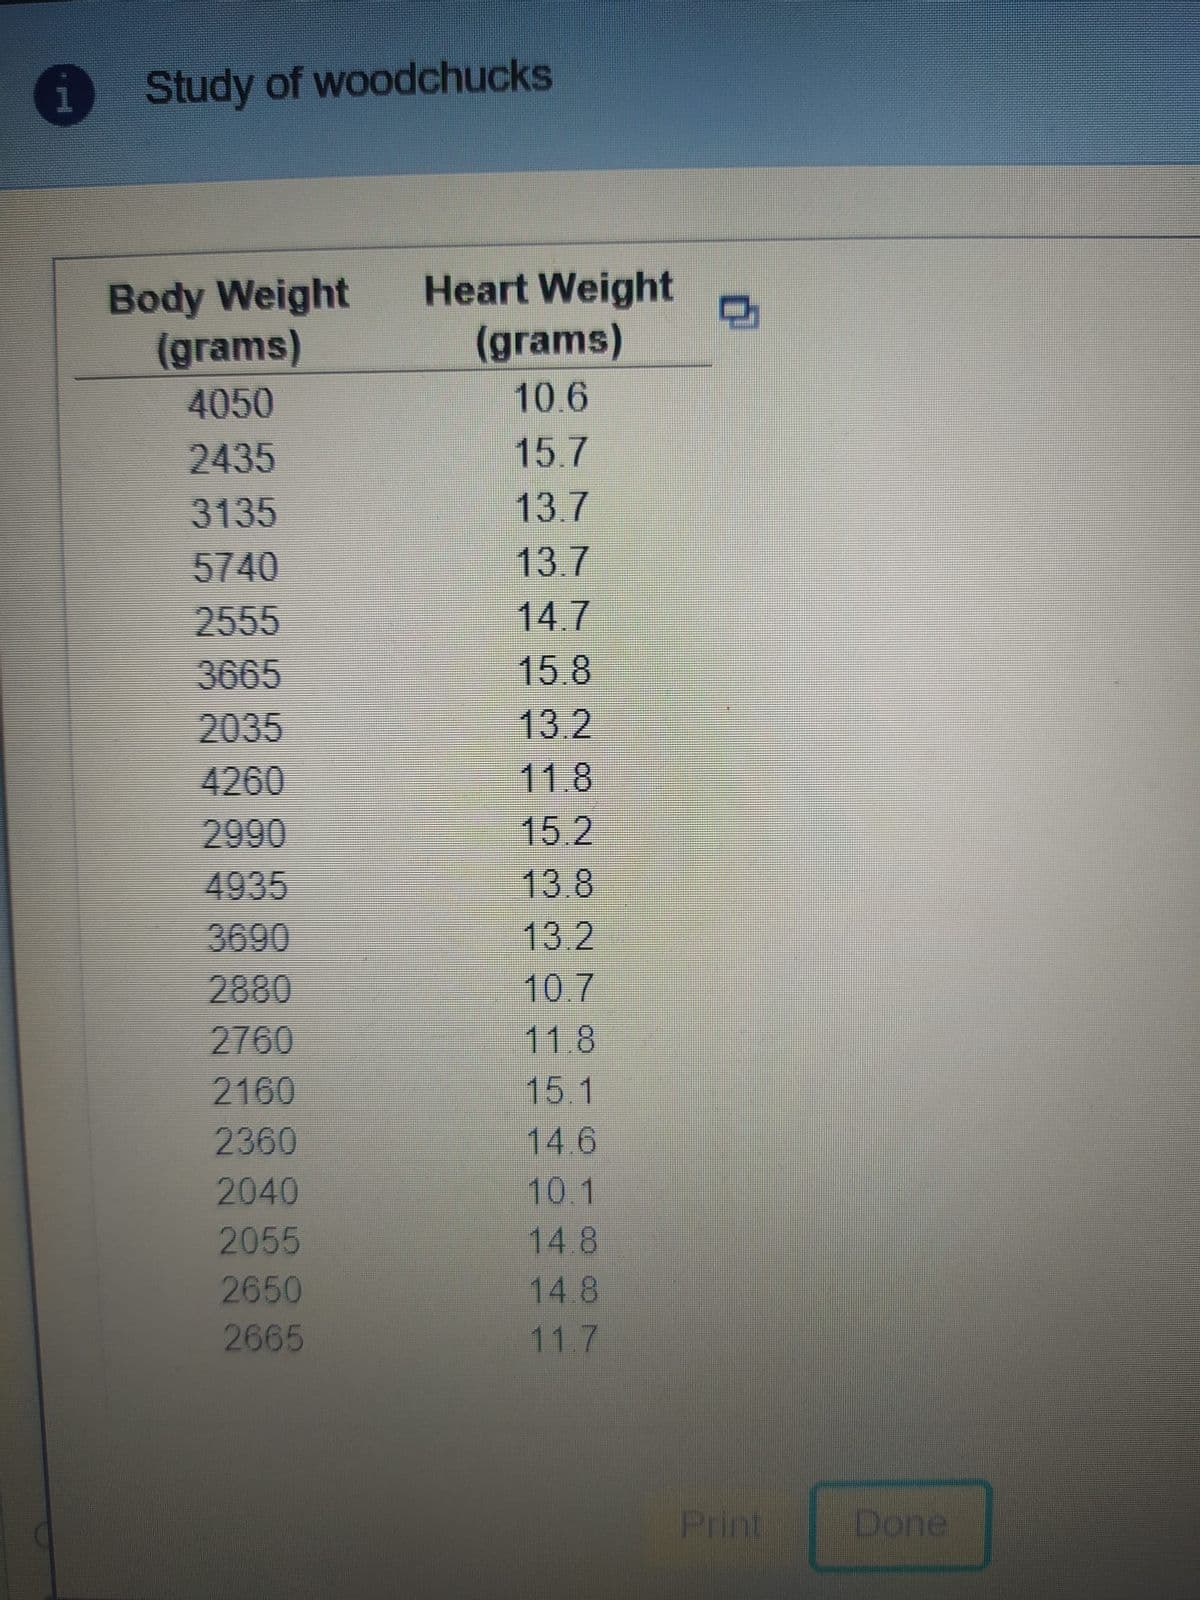 Study of woodchucks
Heart Weight
Body Weight
(grams)
(grams)
4050
10.6
2435
15.7
3135
13.7
5740
13.7
2555
14.7
15.8
3665
2035
13.2
4260
11.8
2990
15.2
4935
3690
2880
13.8
13.2
10 7
2760
118
15.1
14.6
10.1
2160
2360
2040
2055
14 8
2650
14.8
2665
11.7
Print
Done
